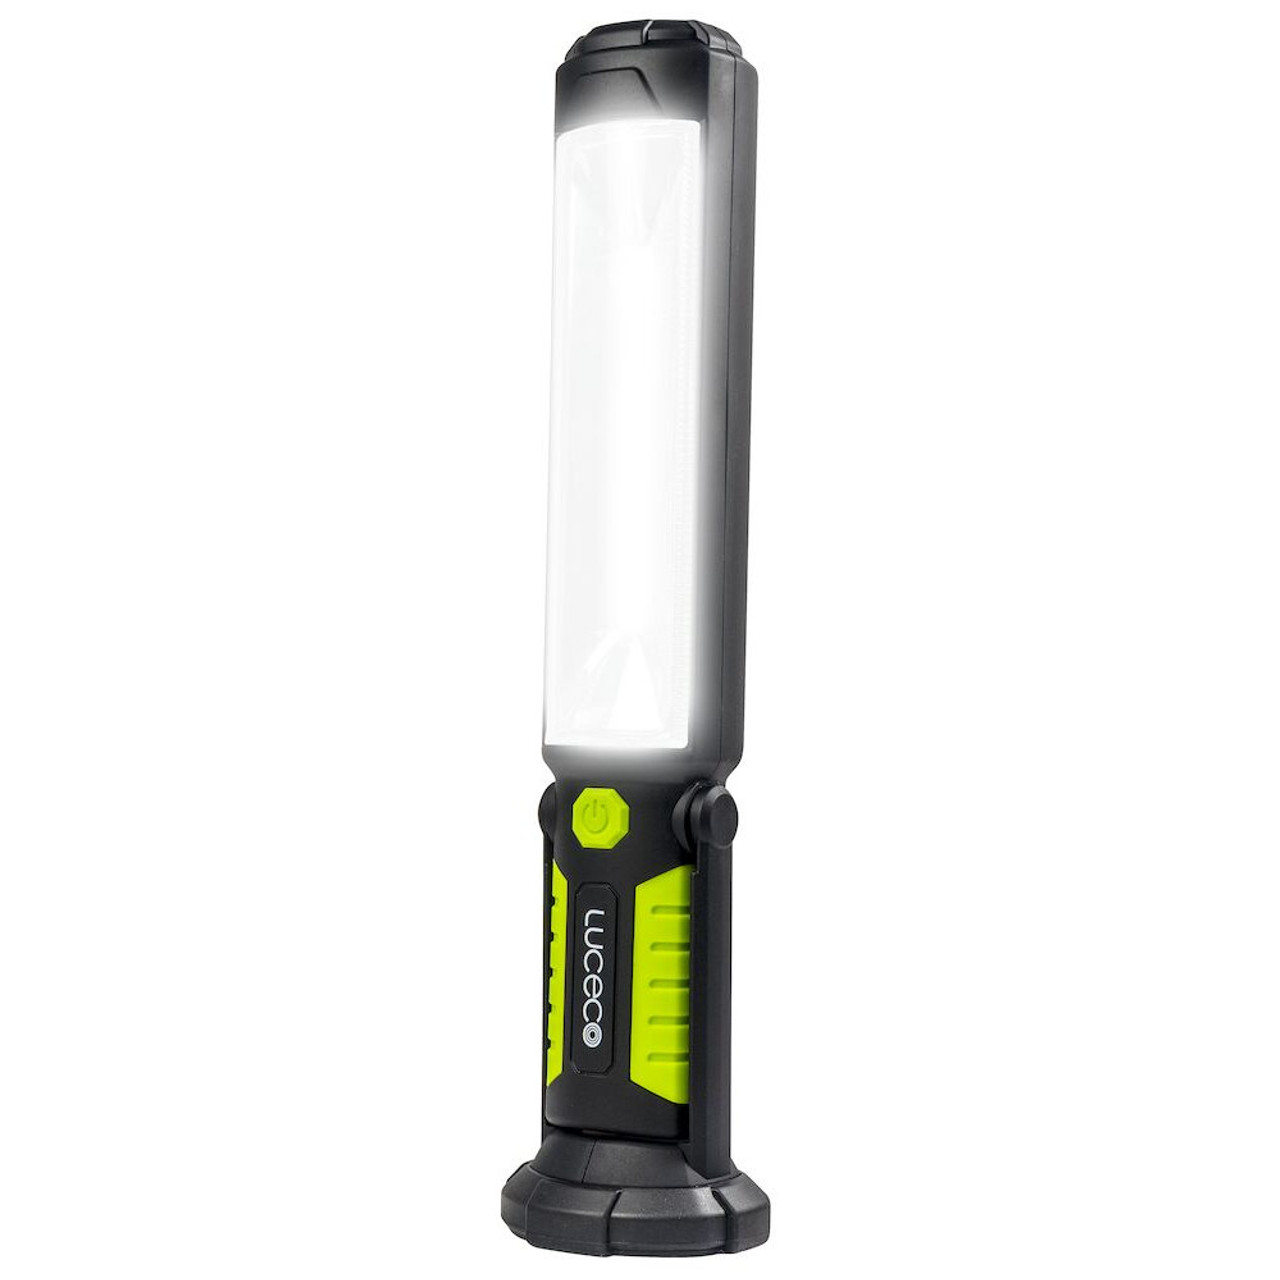 LED USB Rechargeable Torch 5W 450lm 6500K 360 Degrees Tilting